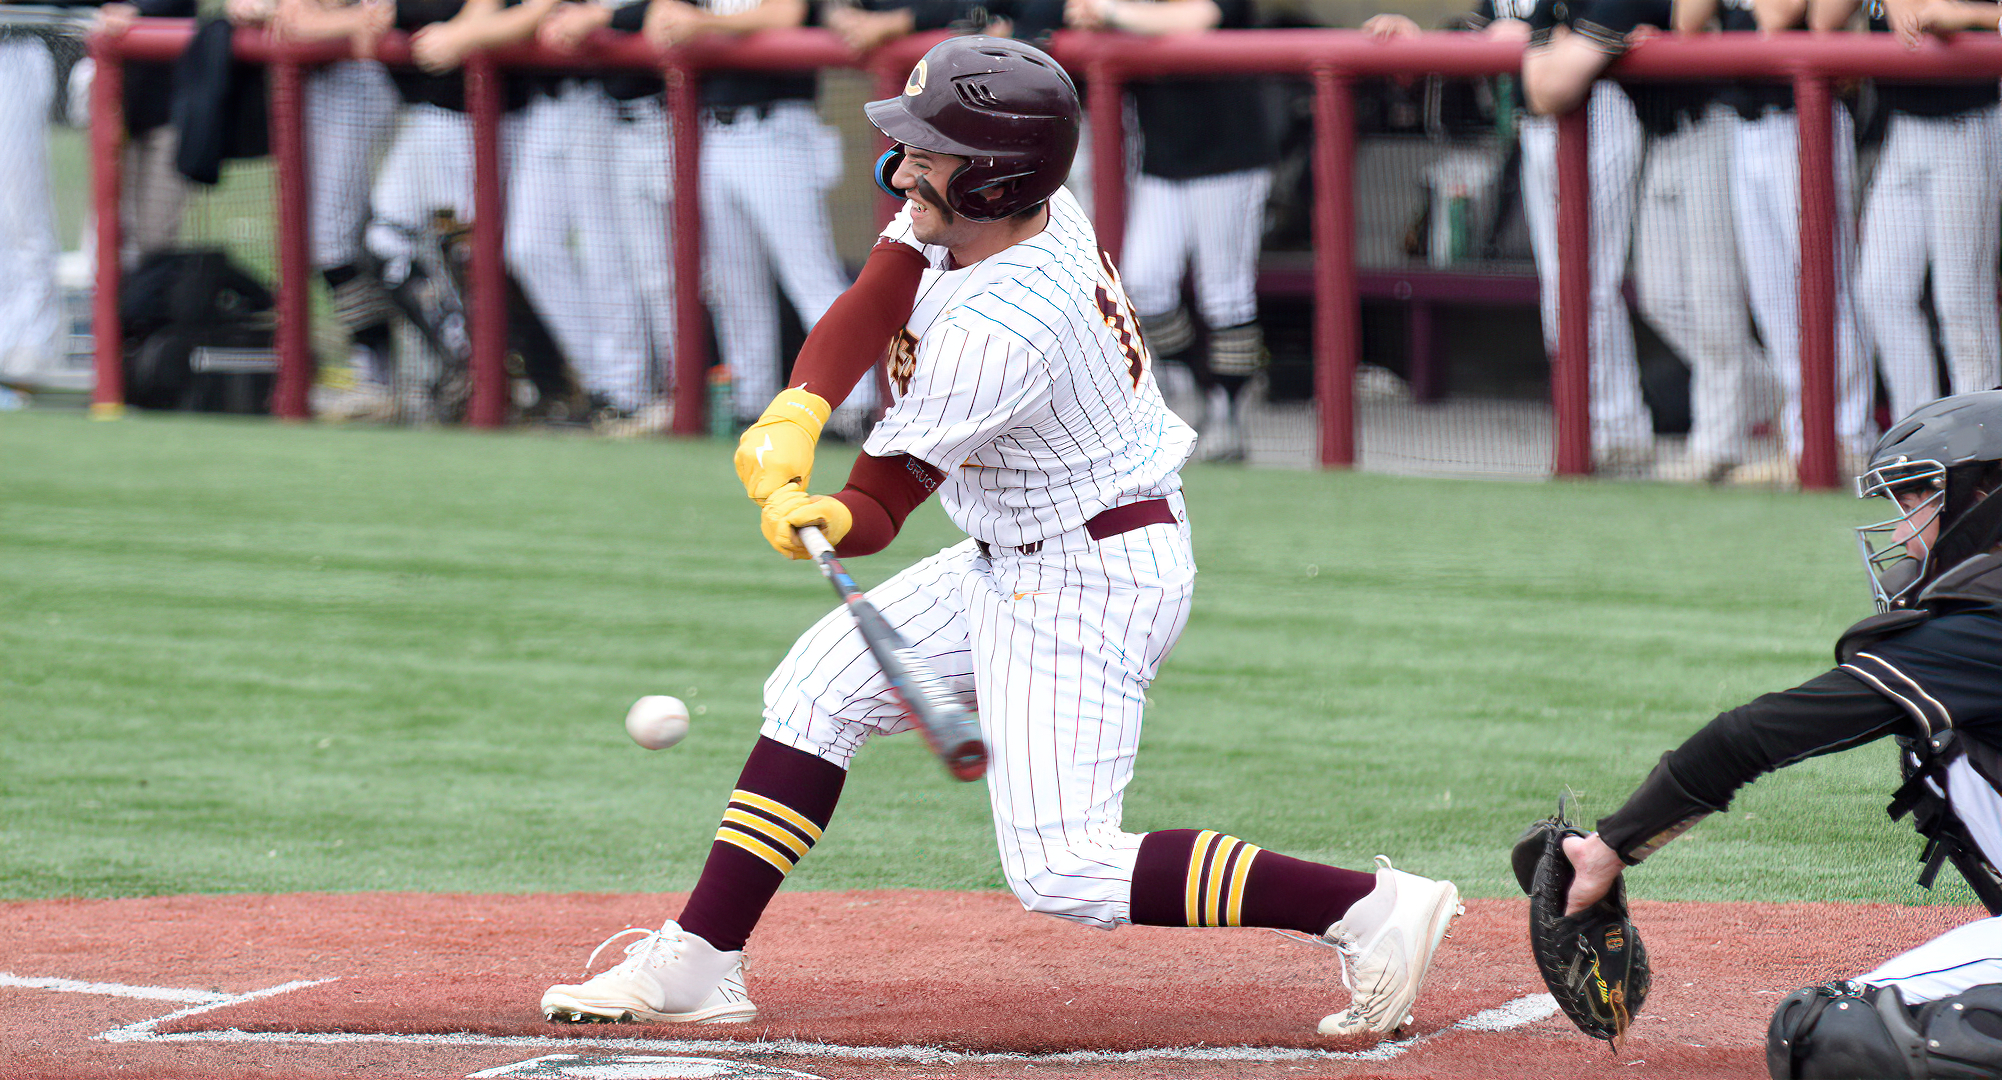 Senior Justin Kloster went 2-for-3 with an RBI in the first game of the Cobbers' doubleheader against Marian in the opener in Florida.